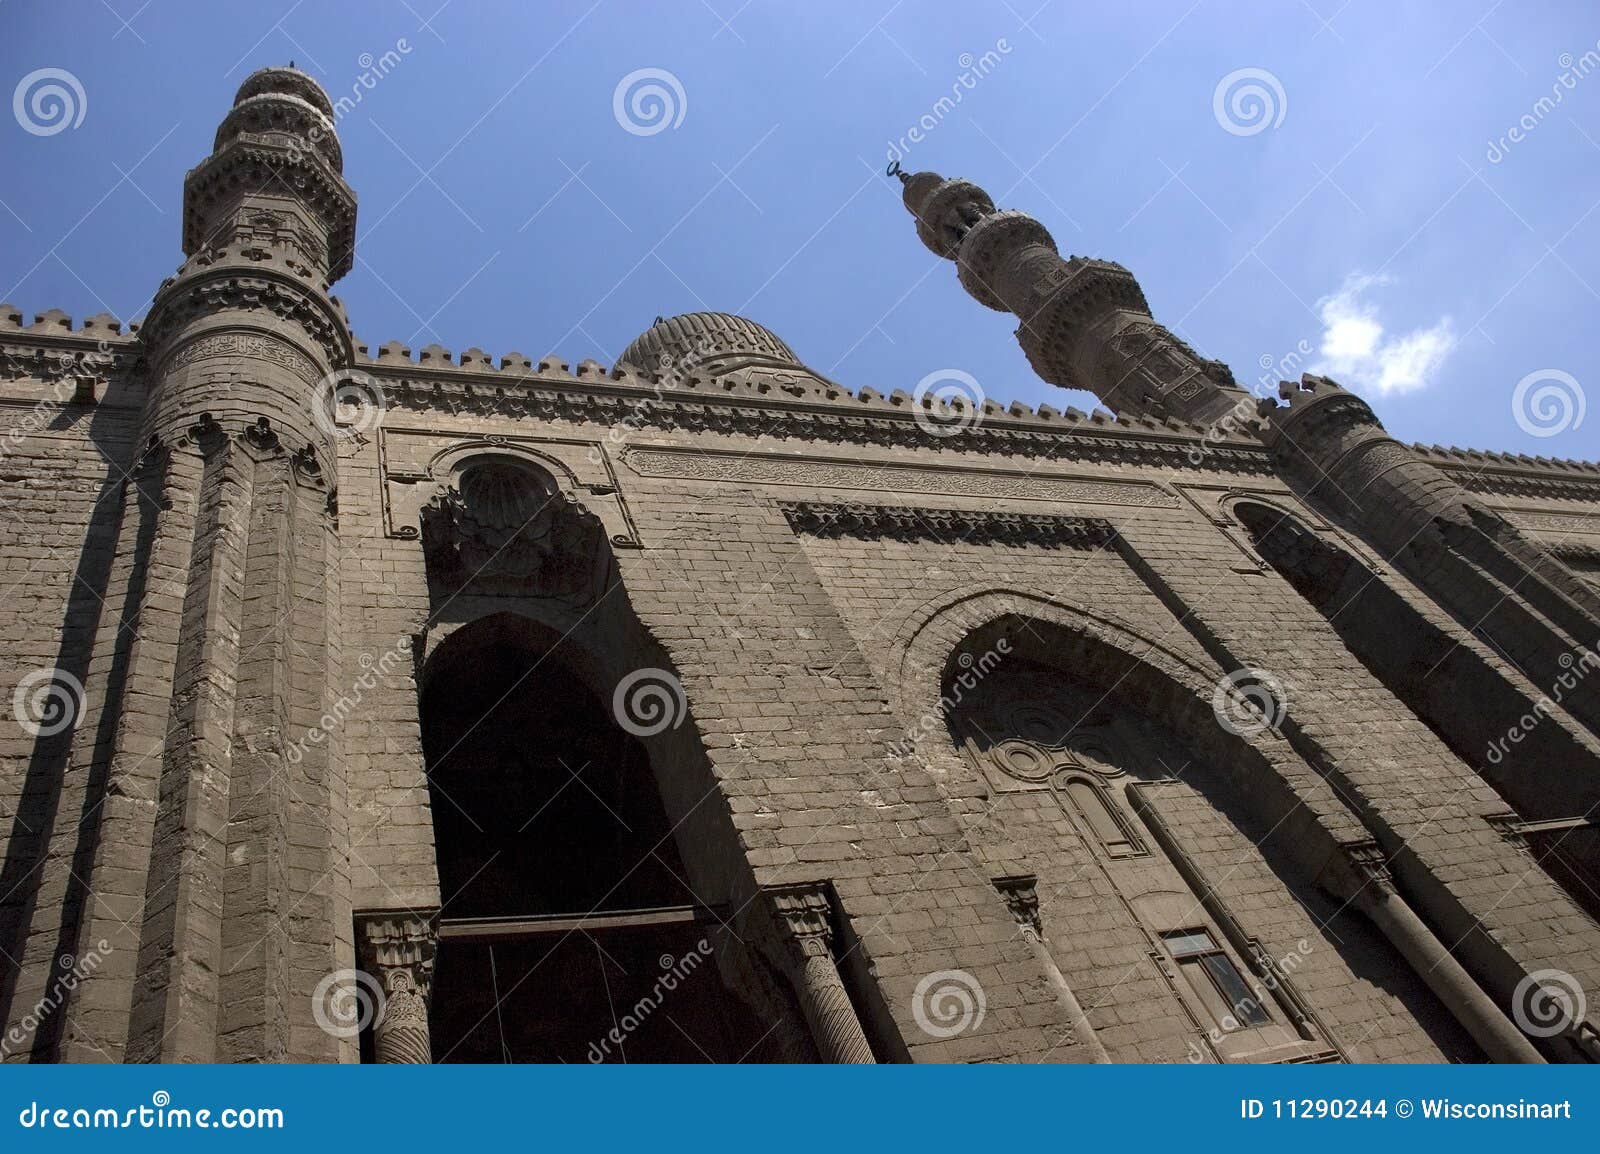 islamic mosque and minarets, travel to cairo egypt